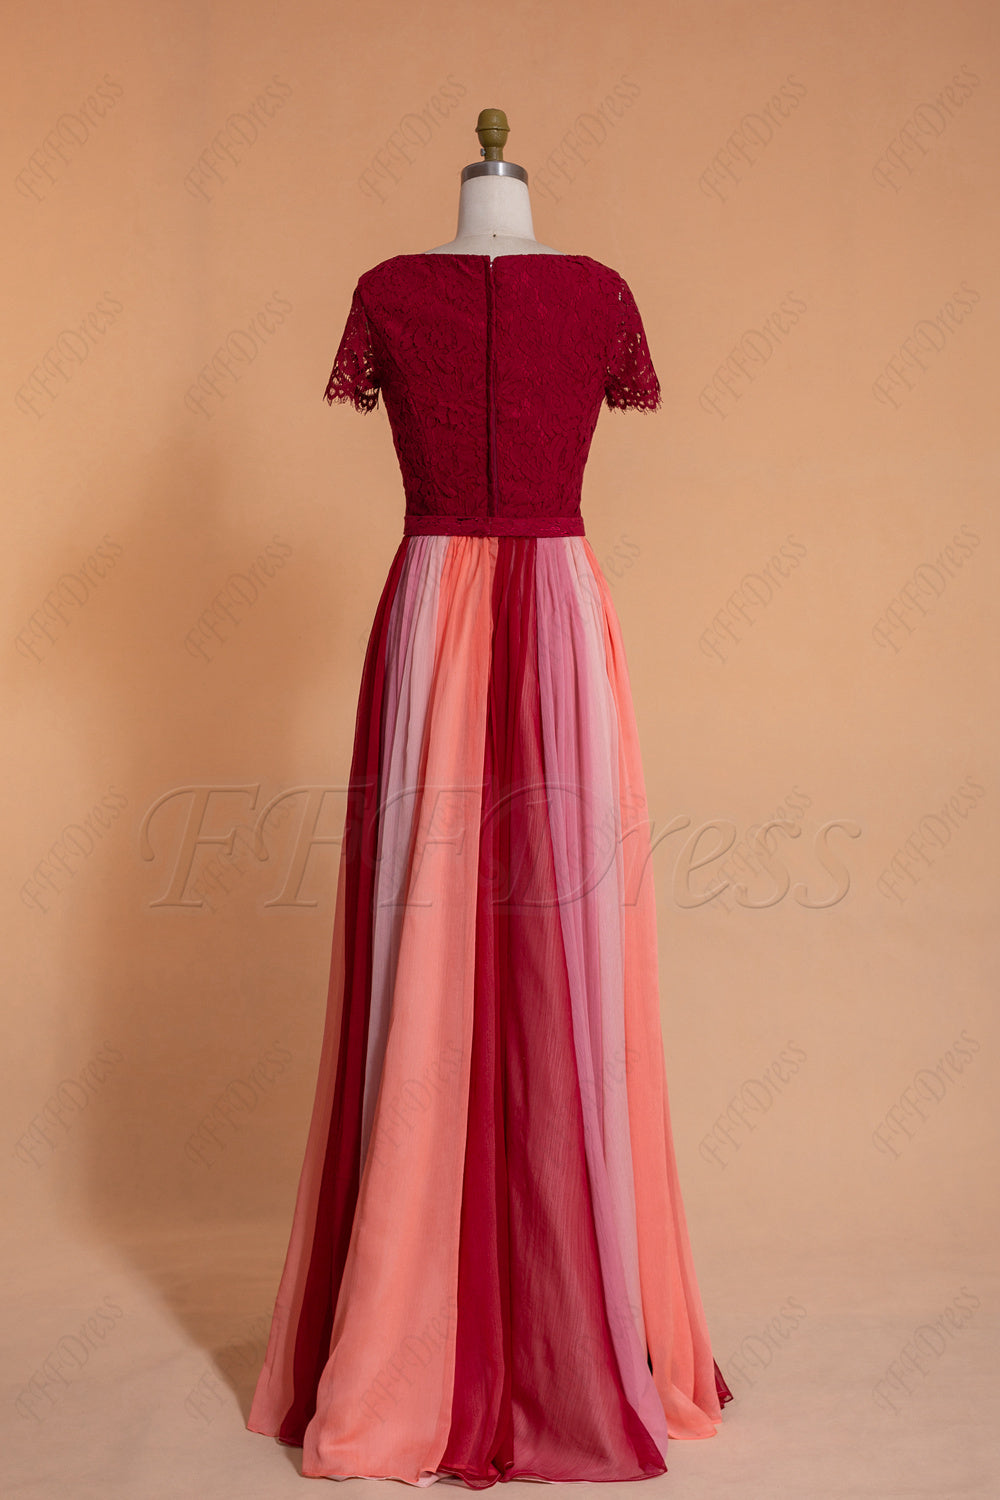 Burgundy coral rose blush multi color Bridesmaid dresses with short sleeves